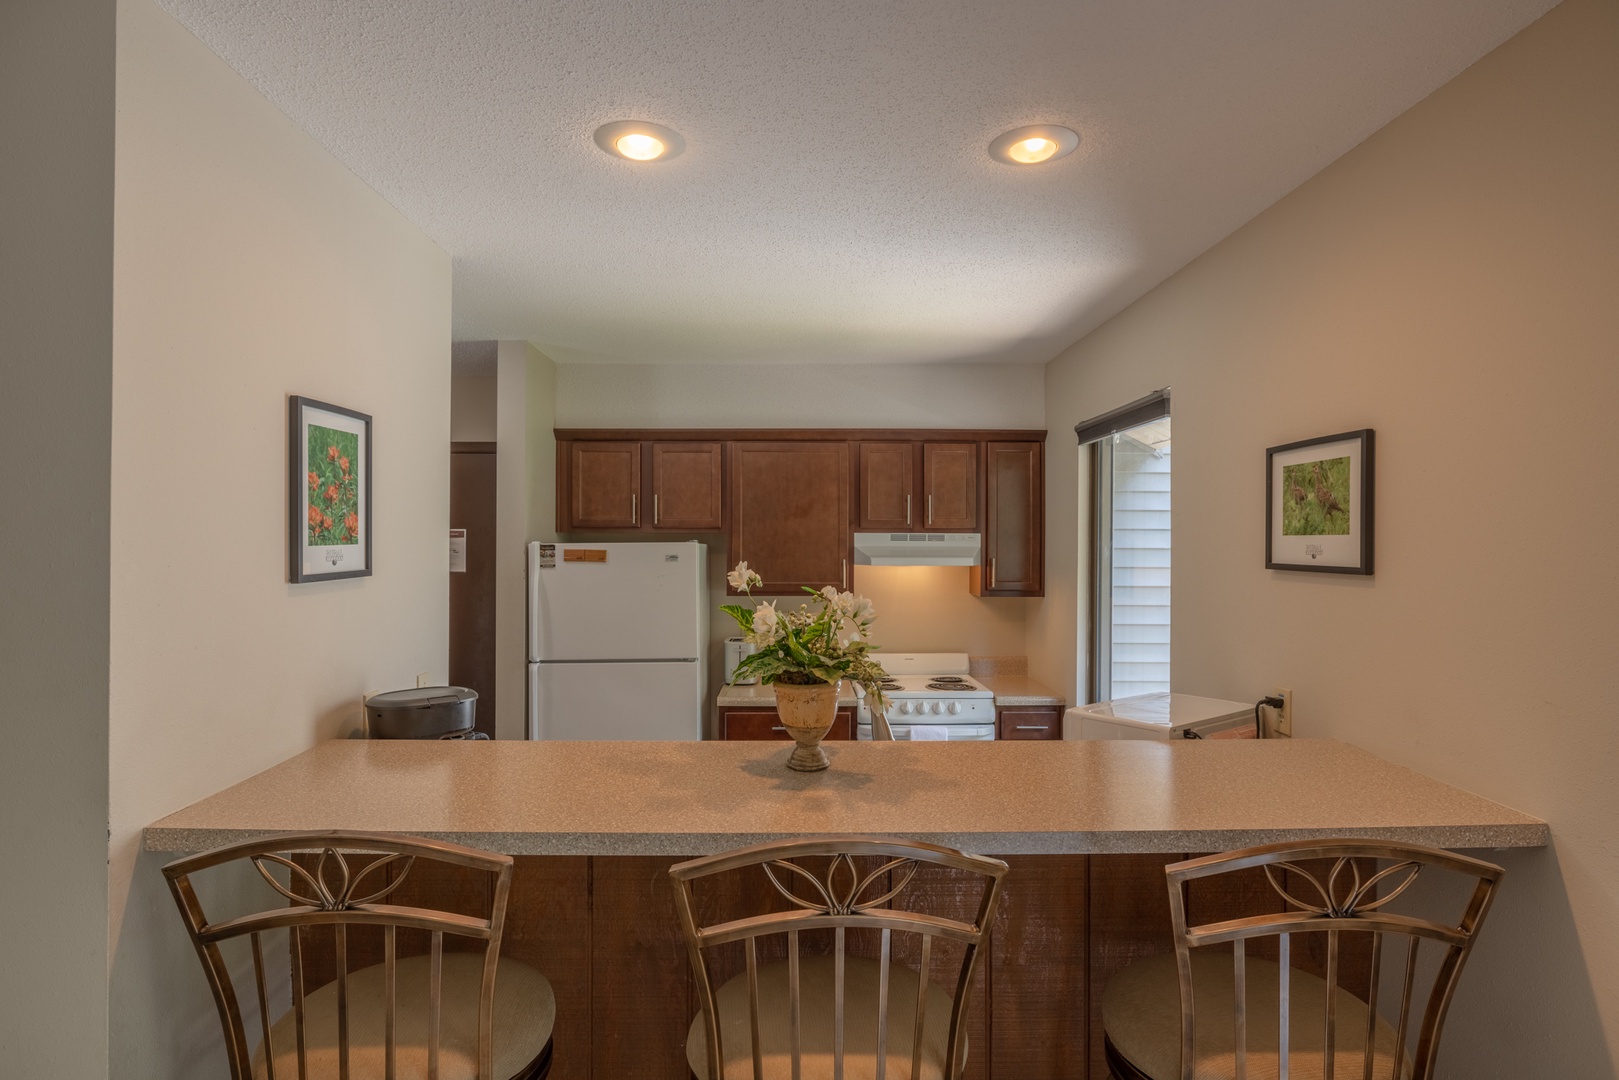 Fully equipped kitchen with ample countertop space and breakfast bar